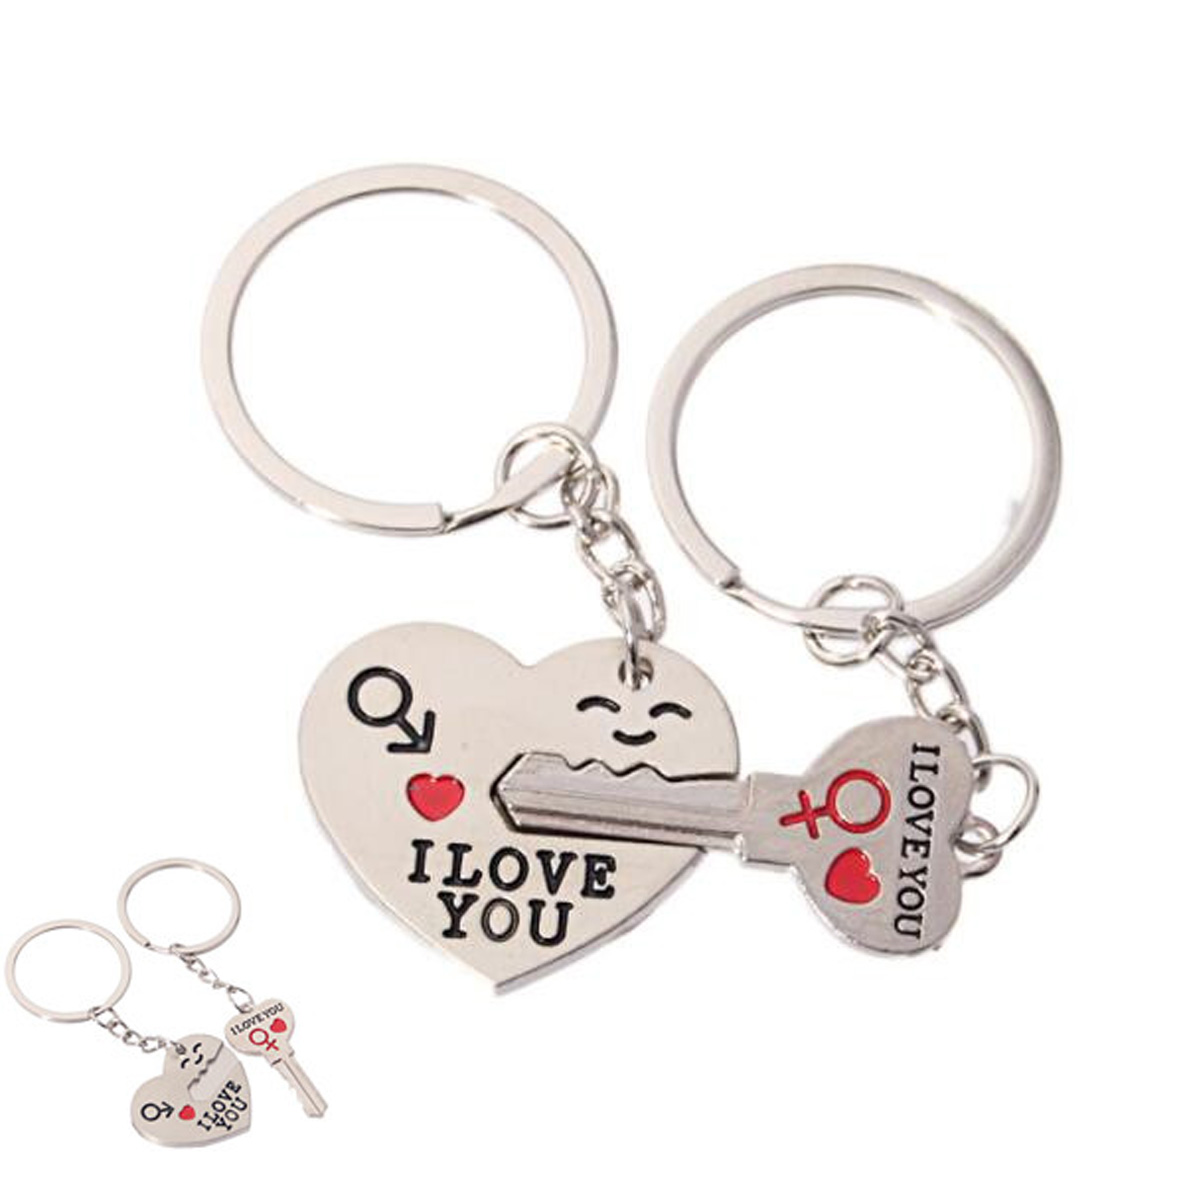 GL-ELY1140 Lover's Keychain Set